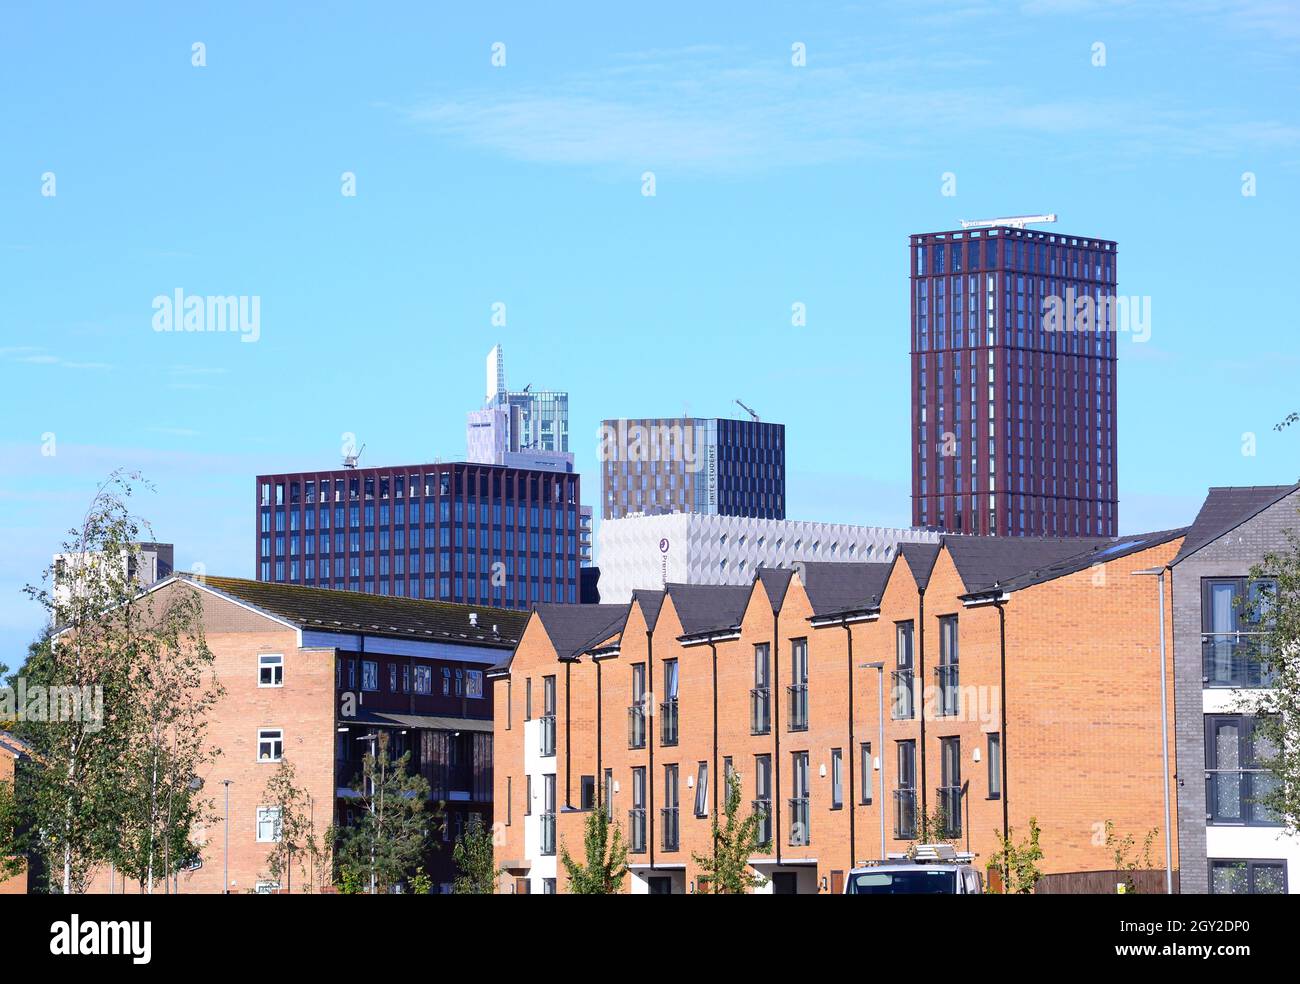 Skyscrapers or high rise buildings, with new houses in foreground, in central Manchester, England, United Kingdom, seen from the South of the city. Stock Photo